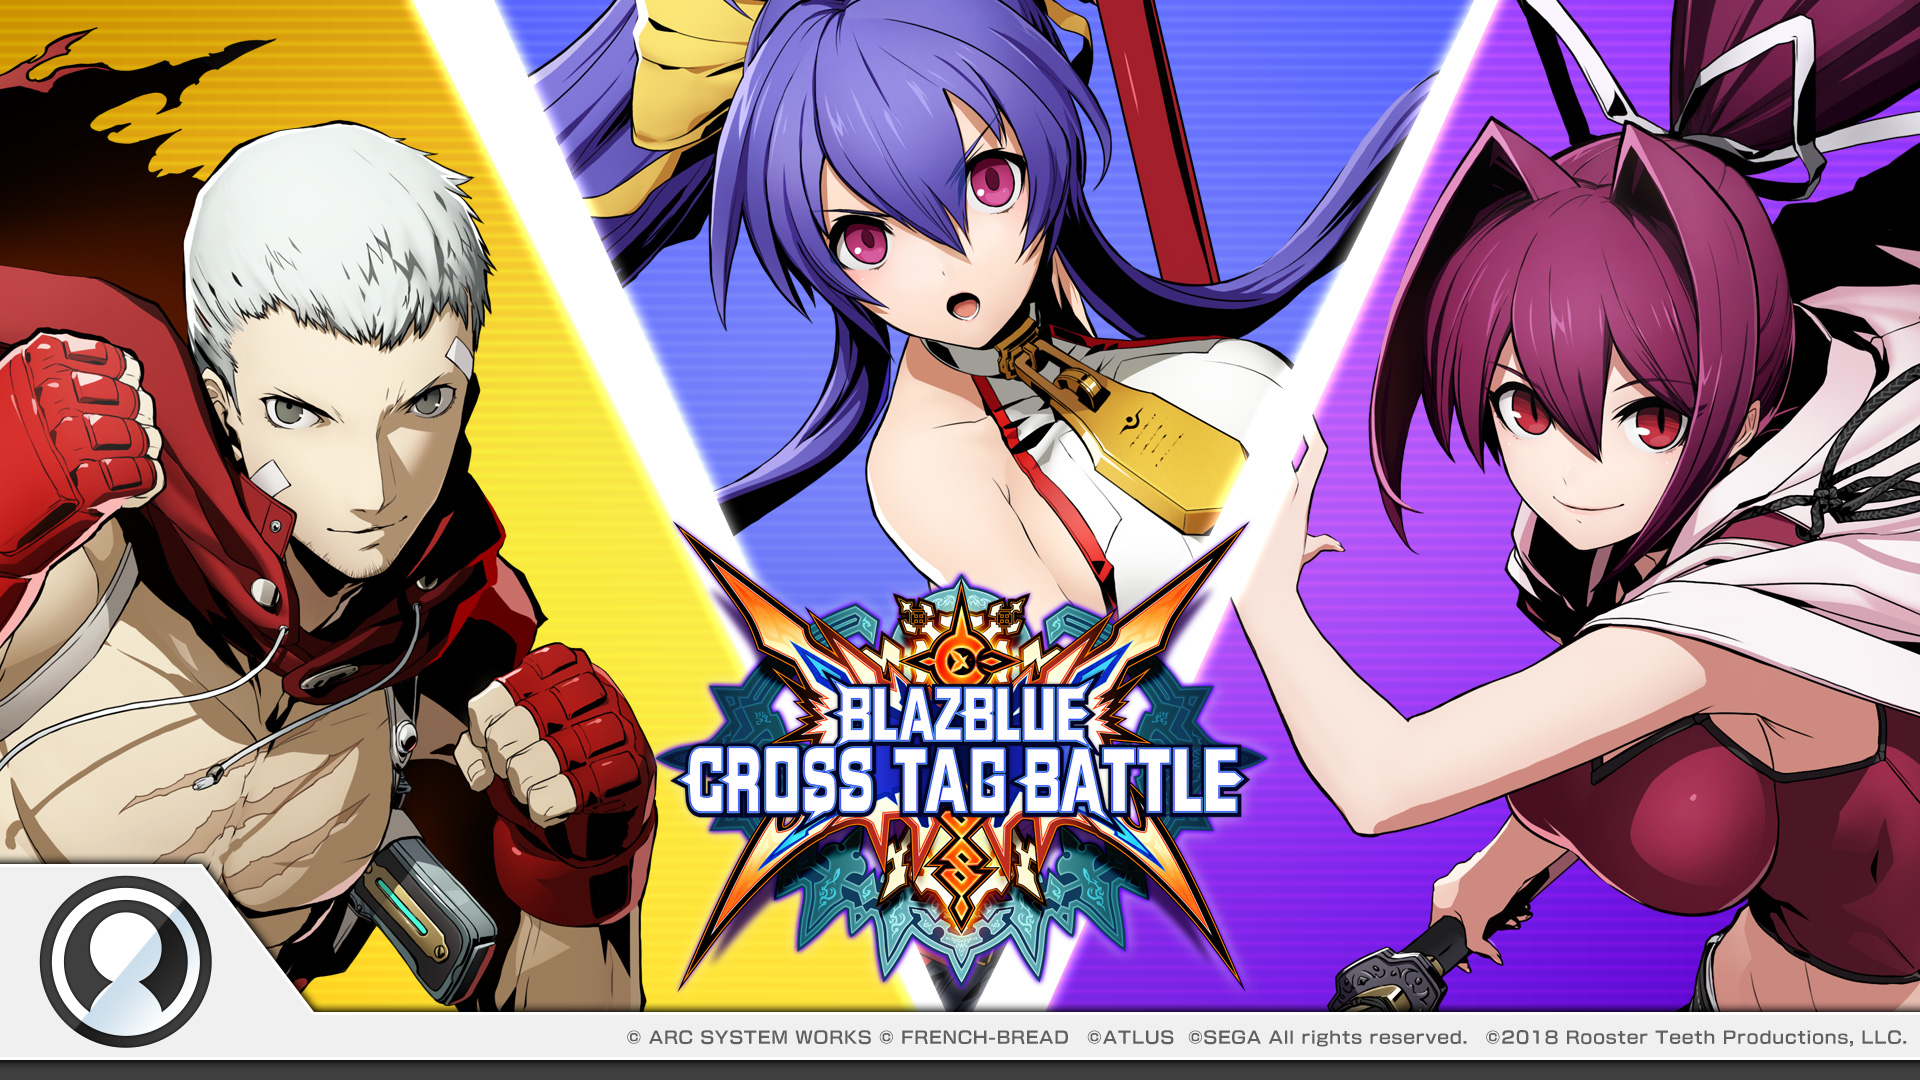 blazblue cross tag battle all in one pack